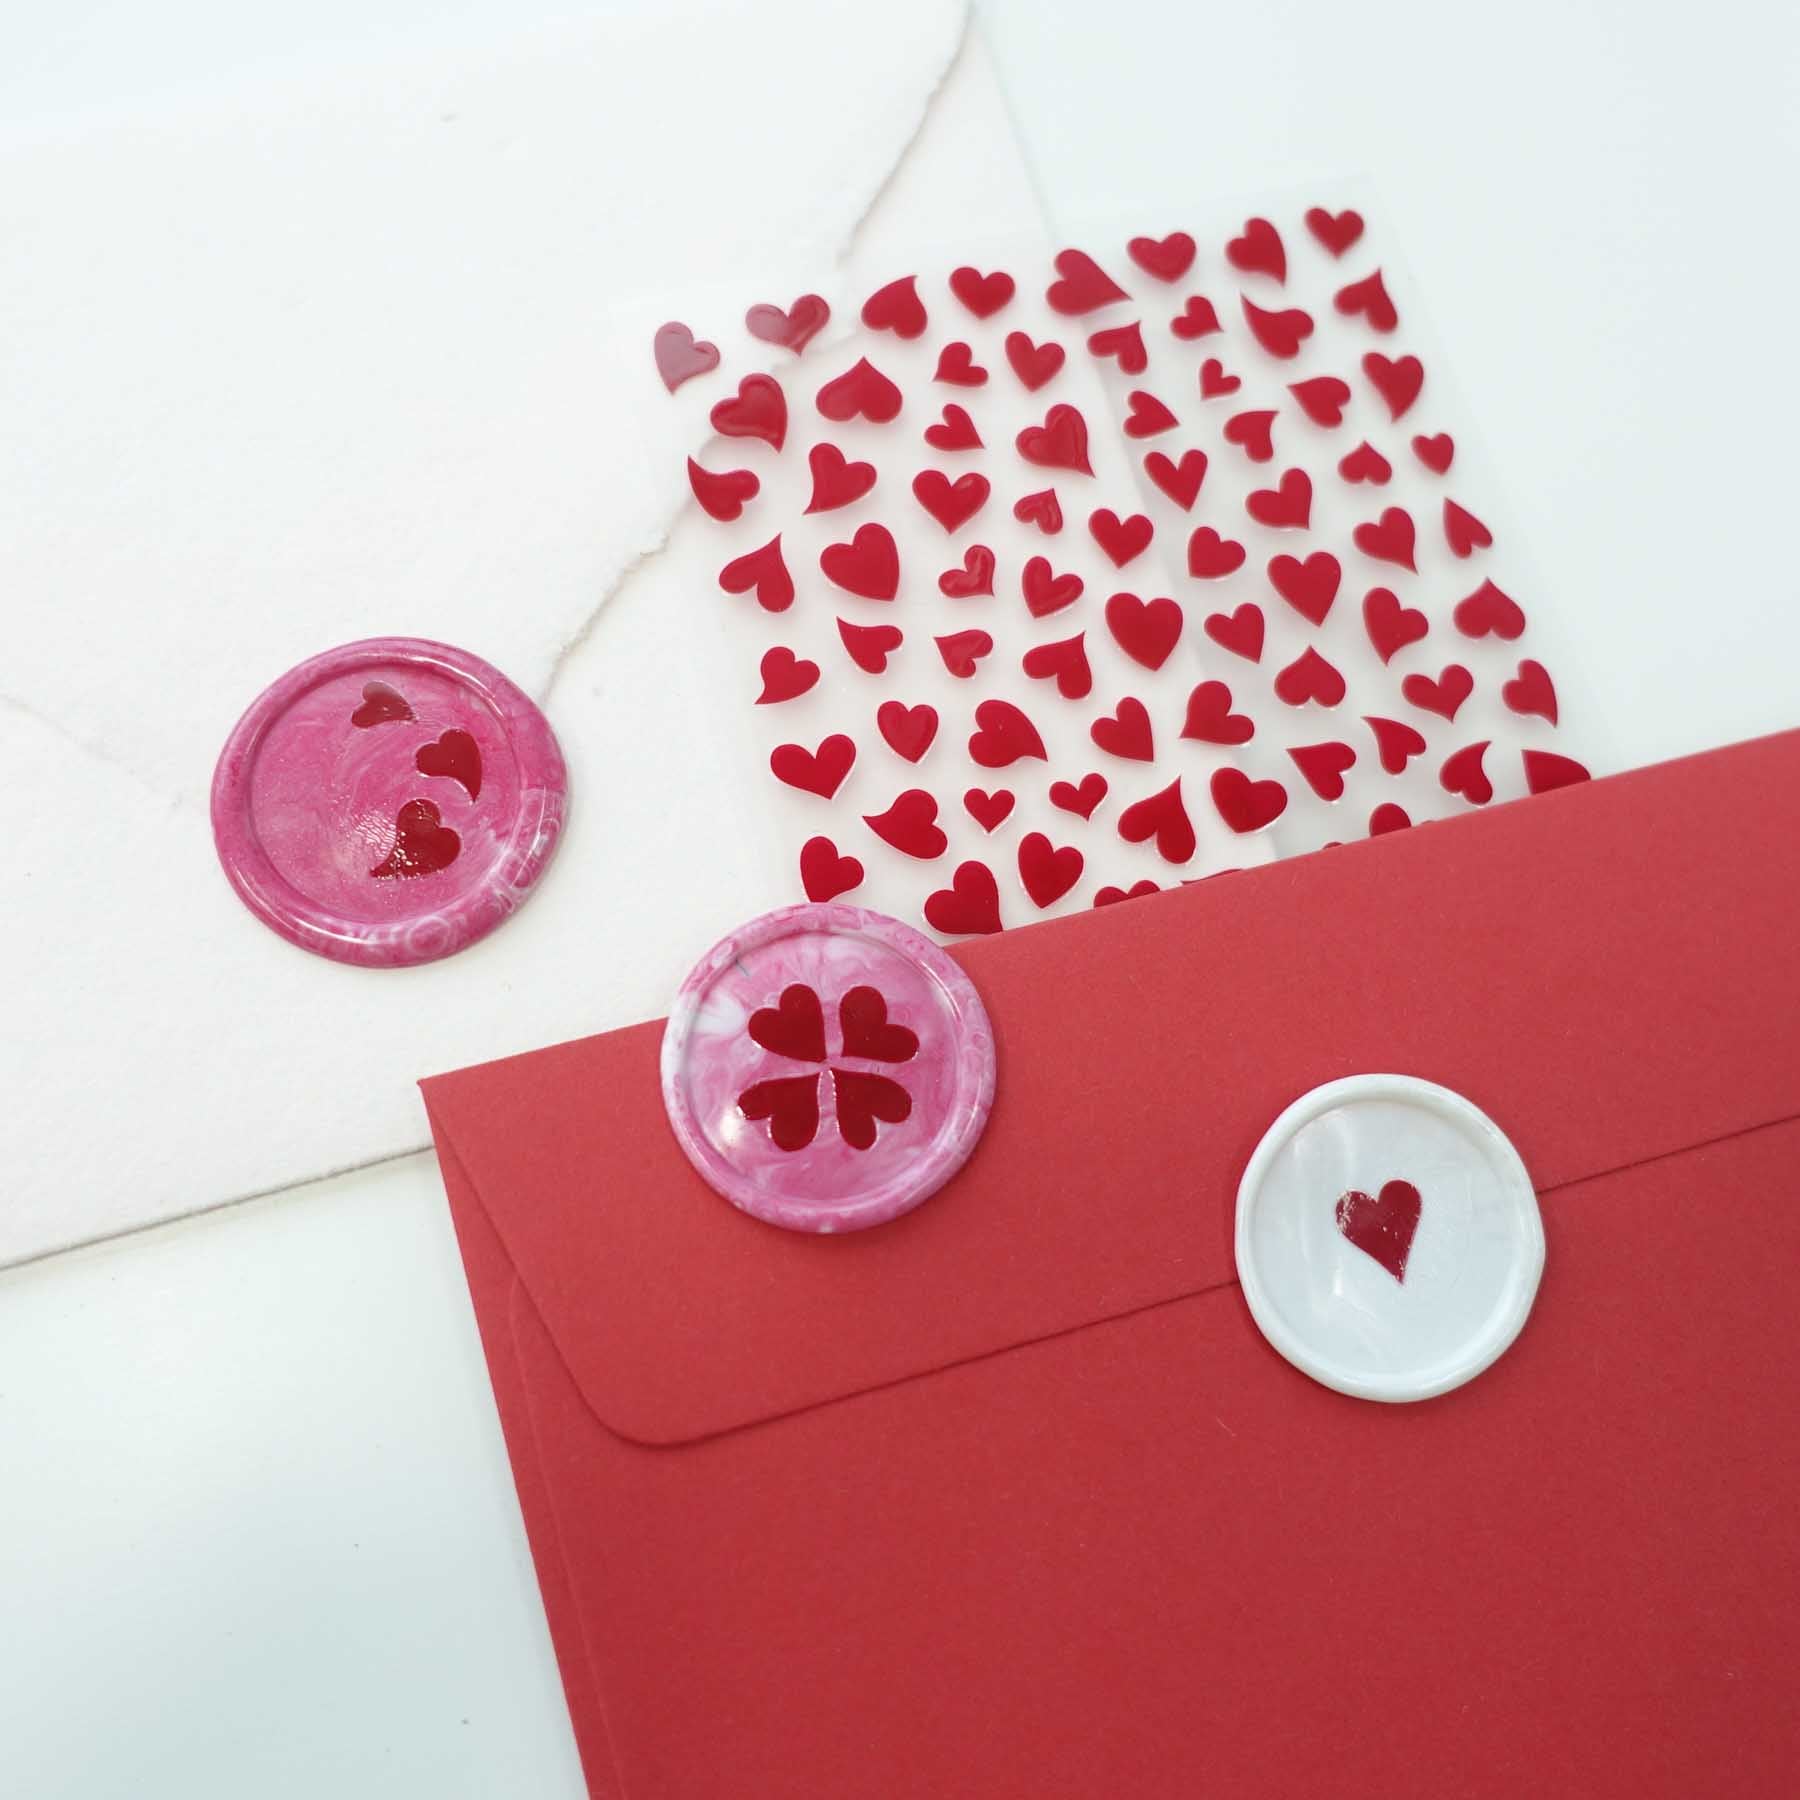 Red Whimsical Hearts Clear-Backed Decorative Stickers Sheet